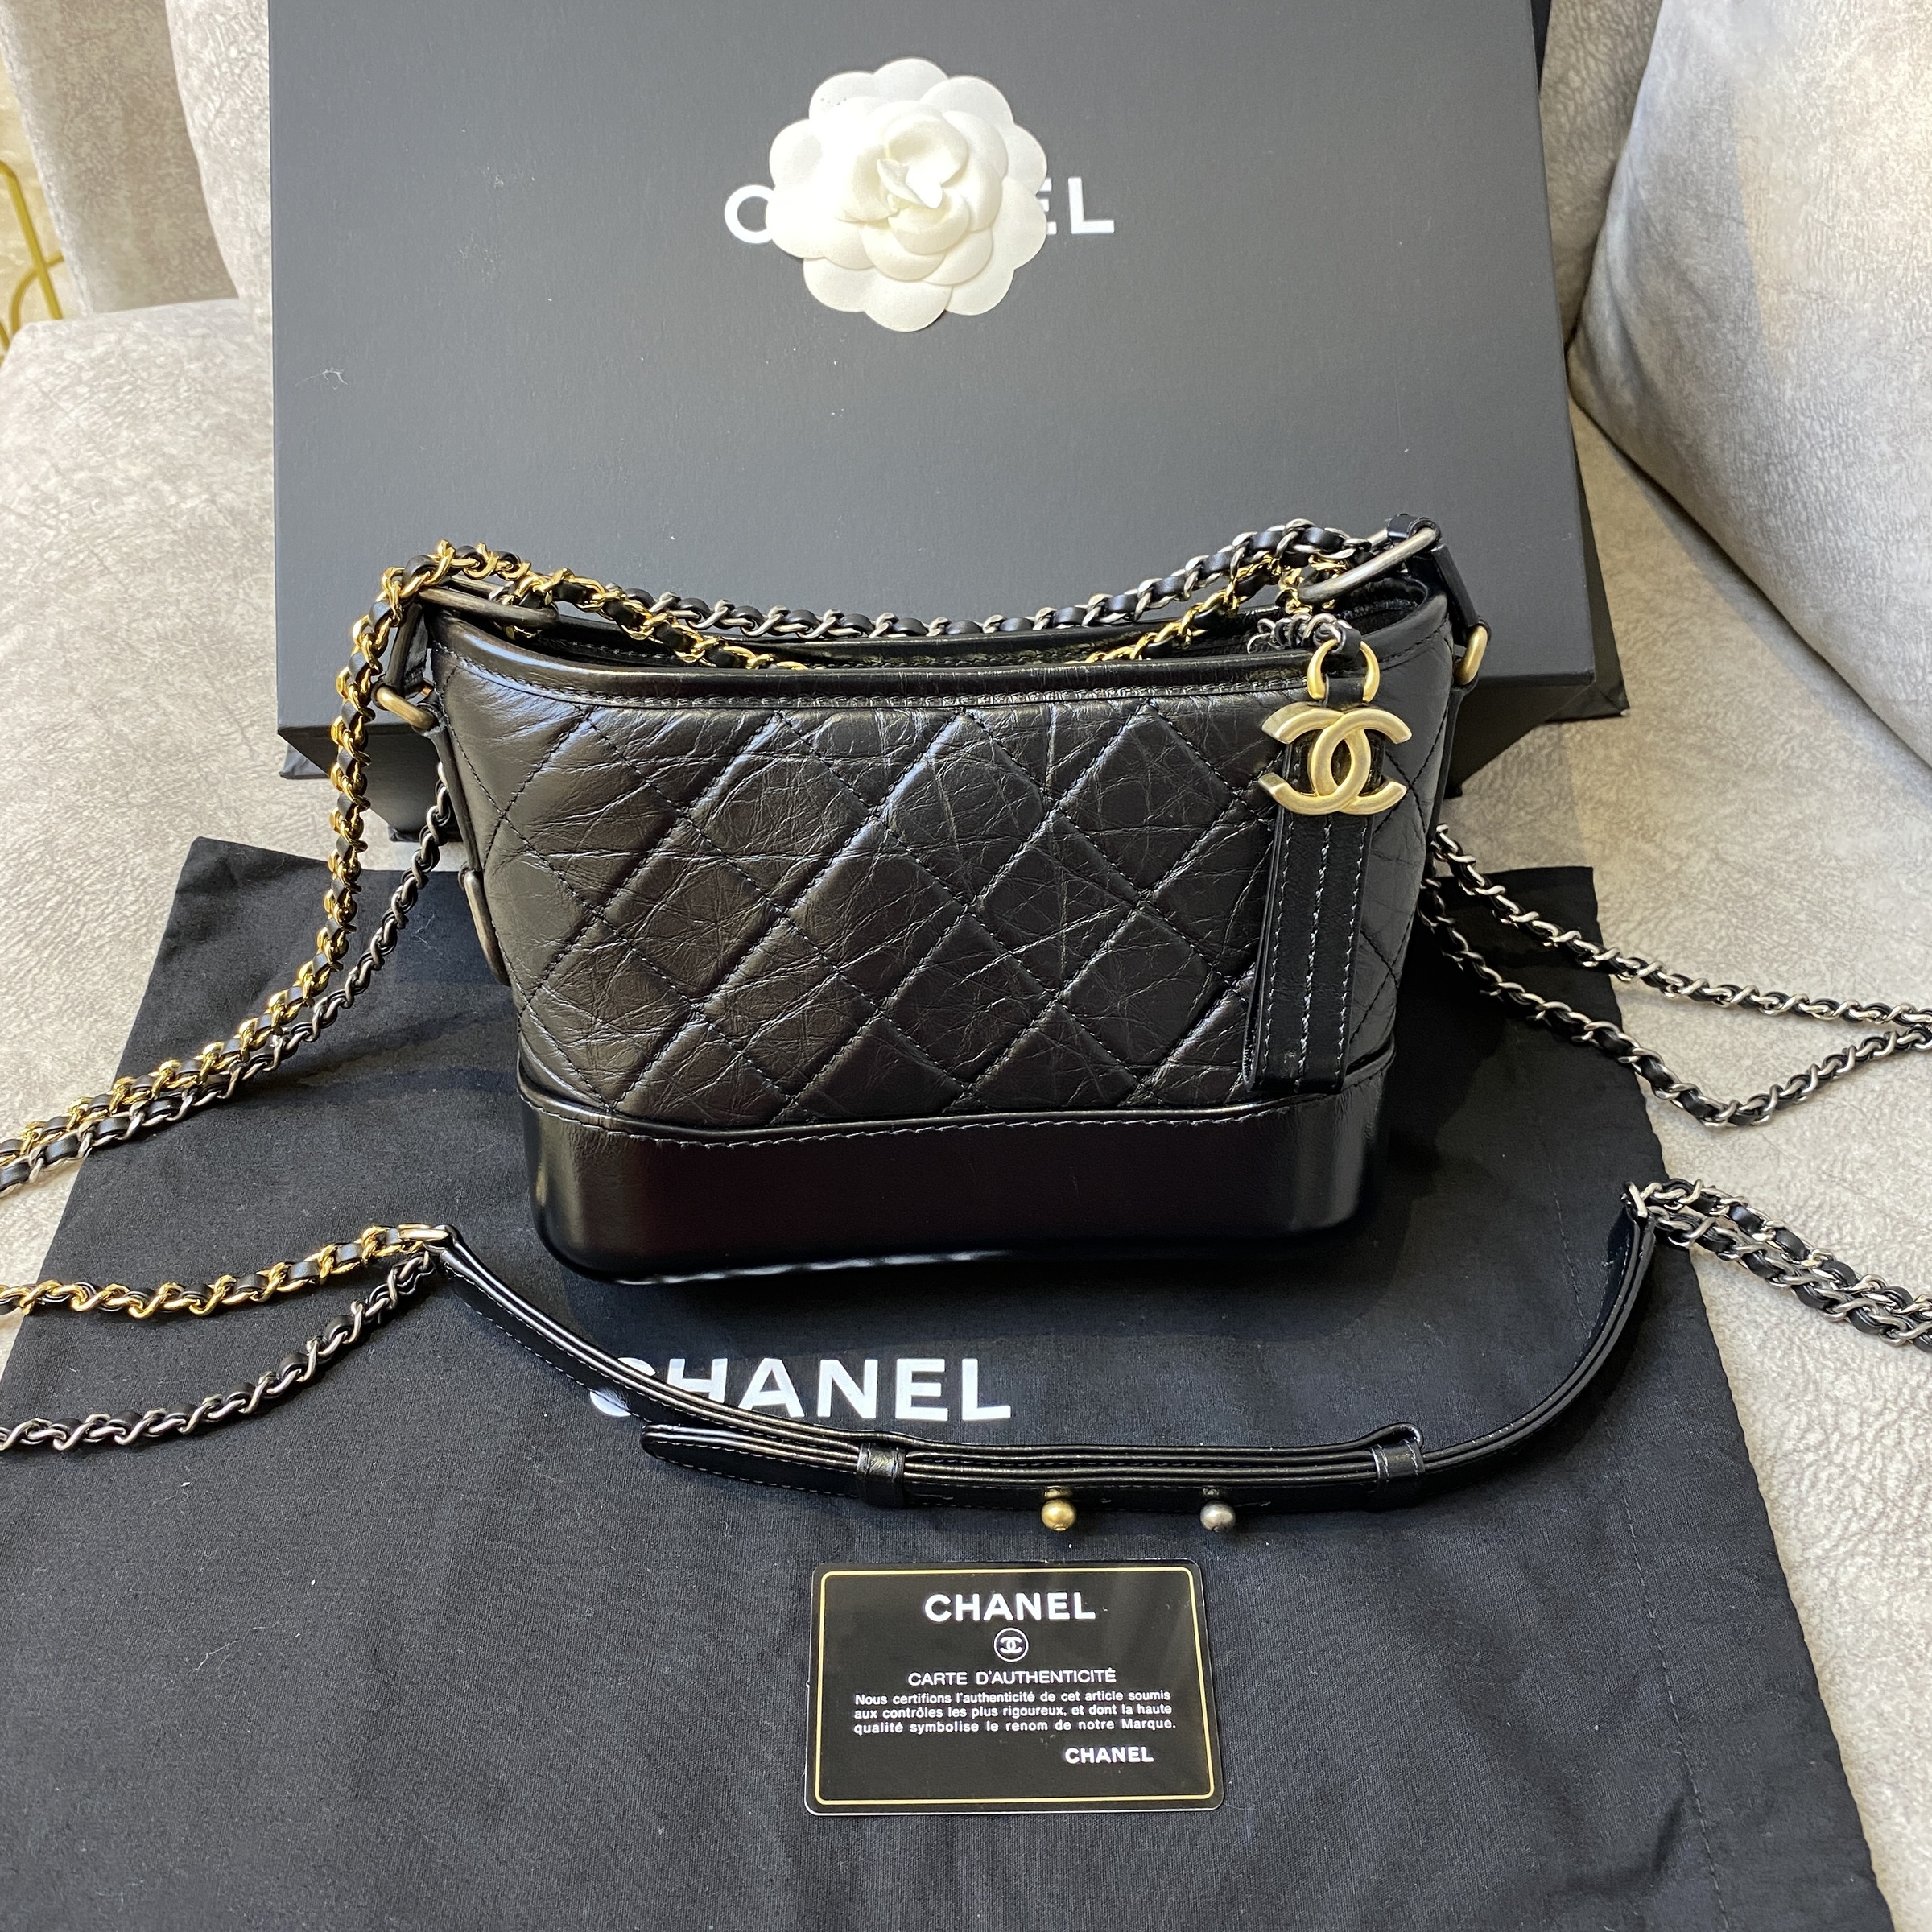 Chanel Black/White Quilted Aged Calfskin Leather Medium Gabrielle Hobo Bag  - Yoogi's Closet